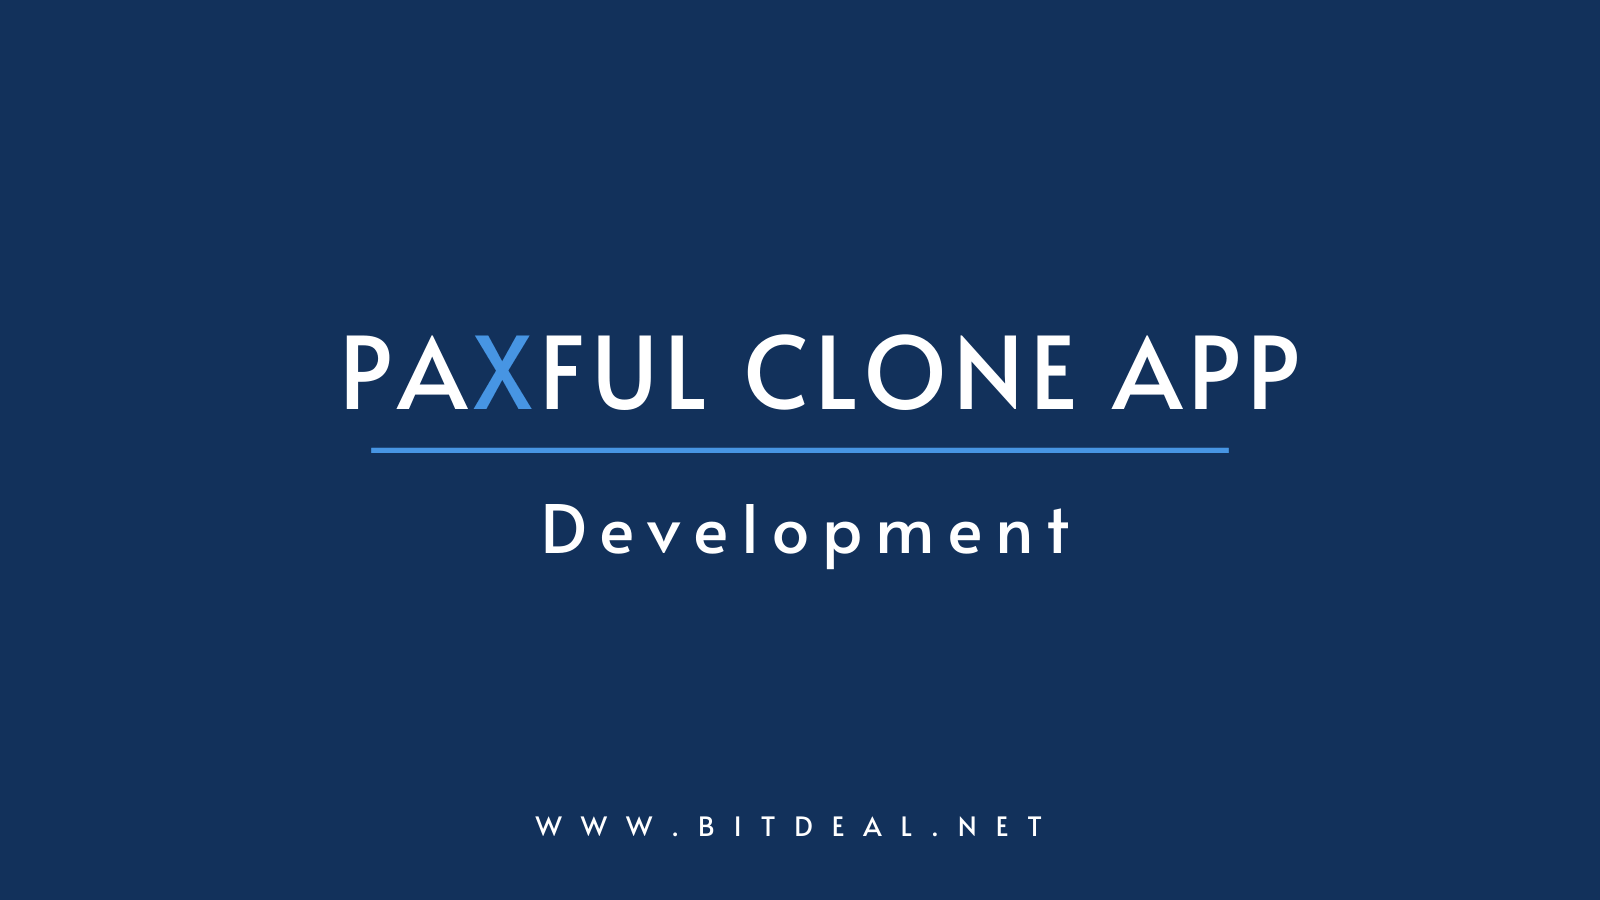 Introducing Paxful Clone App Development For Cryptocurrency Exchange Startups